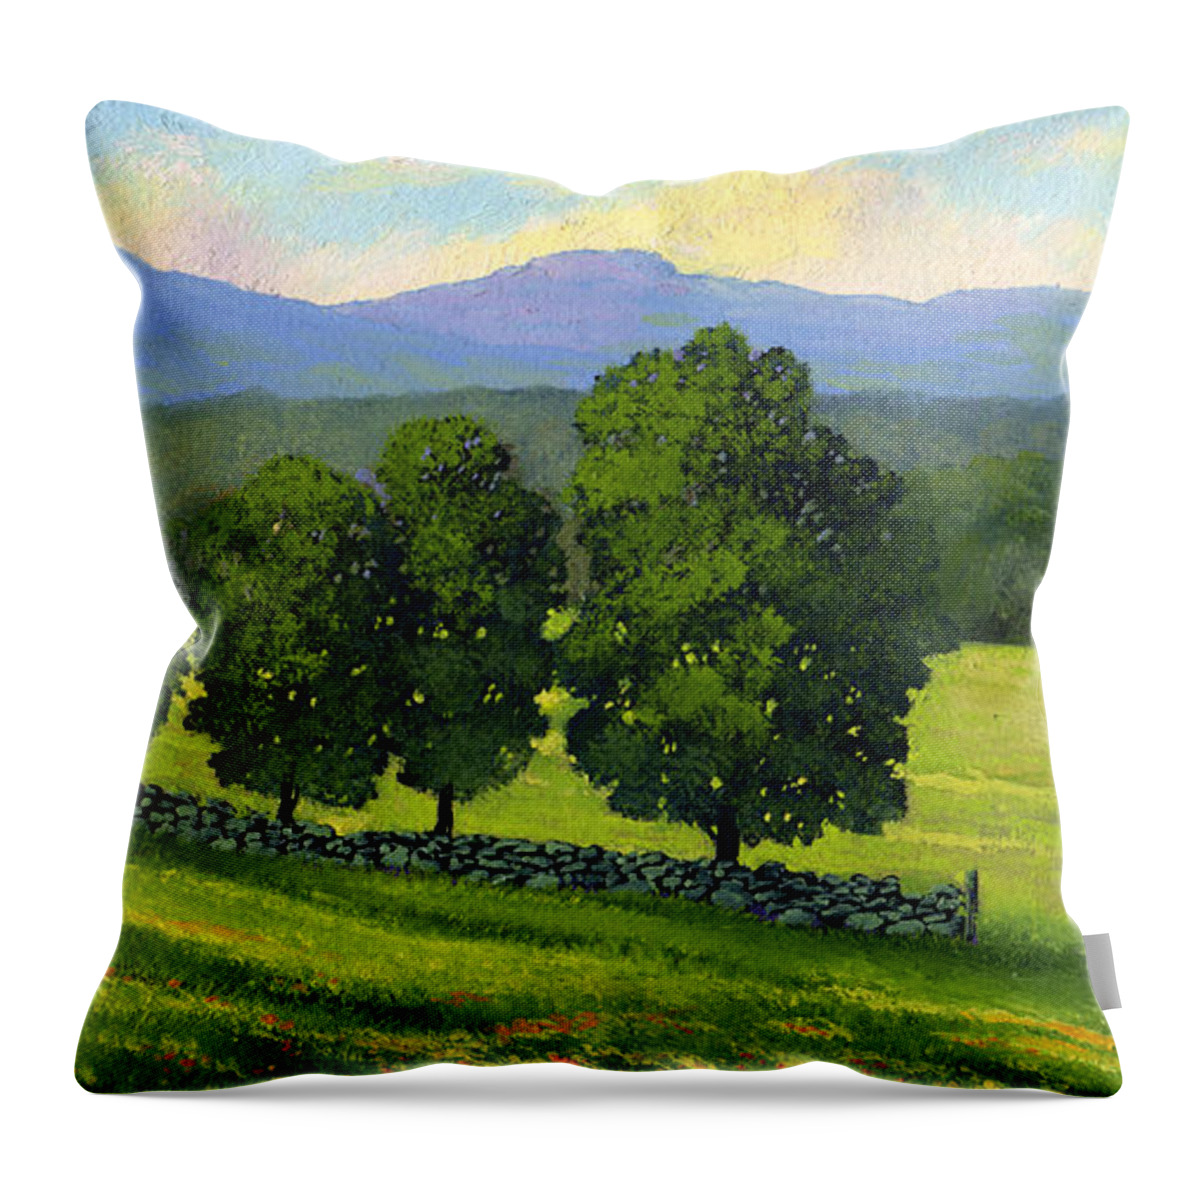 Landscape Throw Pillow featuring the painting Distant Mountains by Frank Wilson